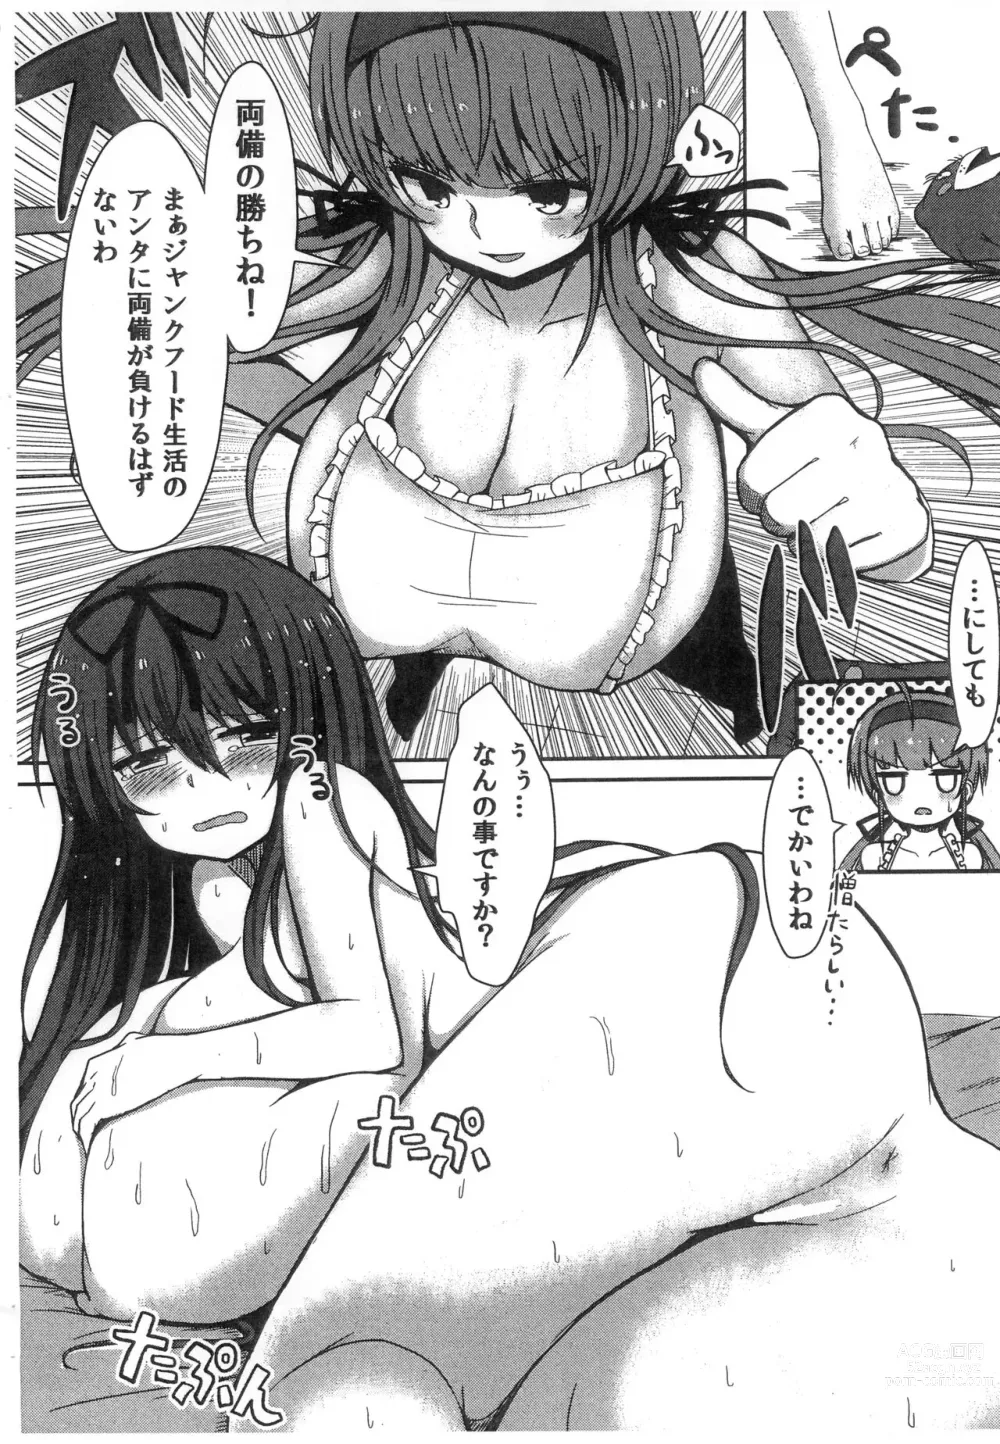 Page 3 of doujinshi Small Breasted Bully